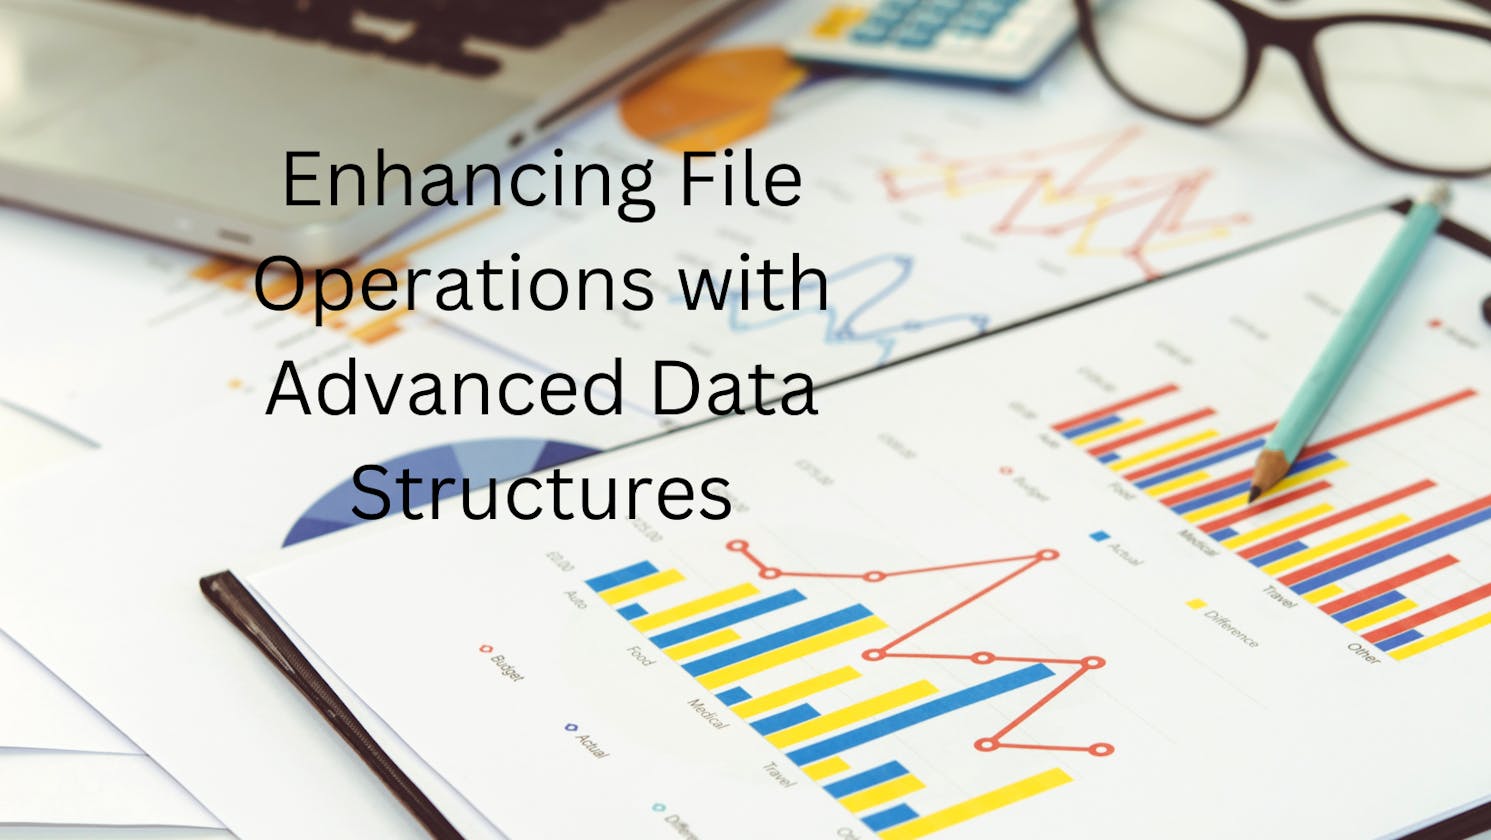 Enhancing File Operations with Advanced Data Structures